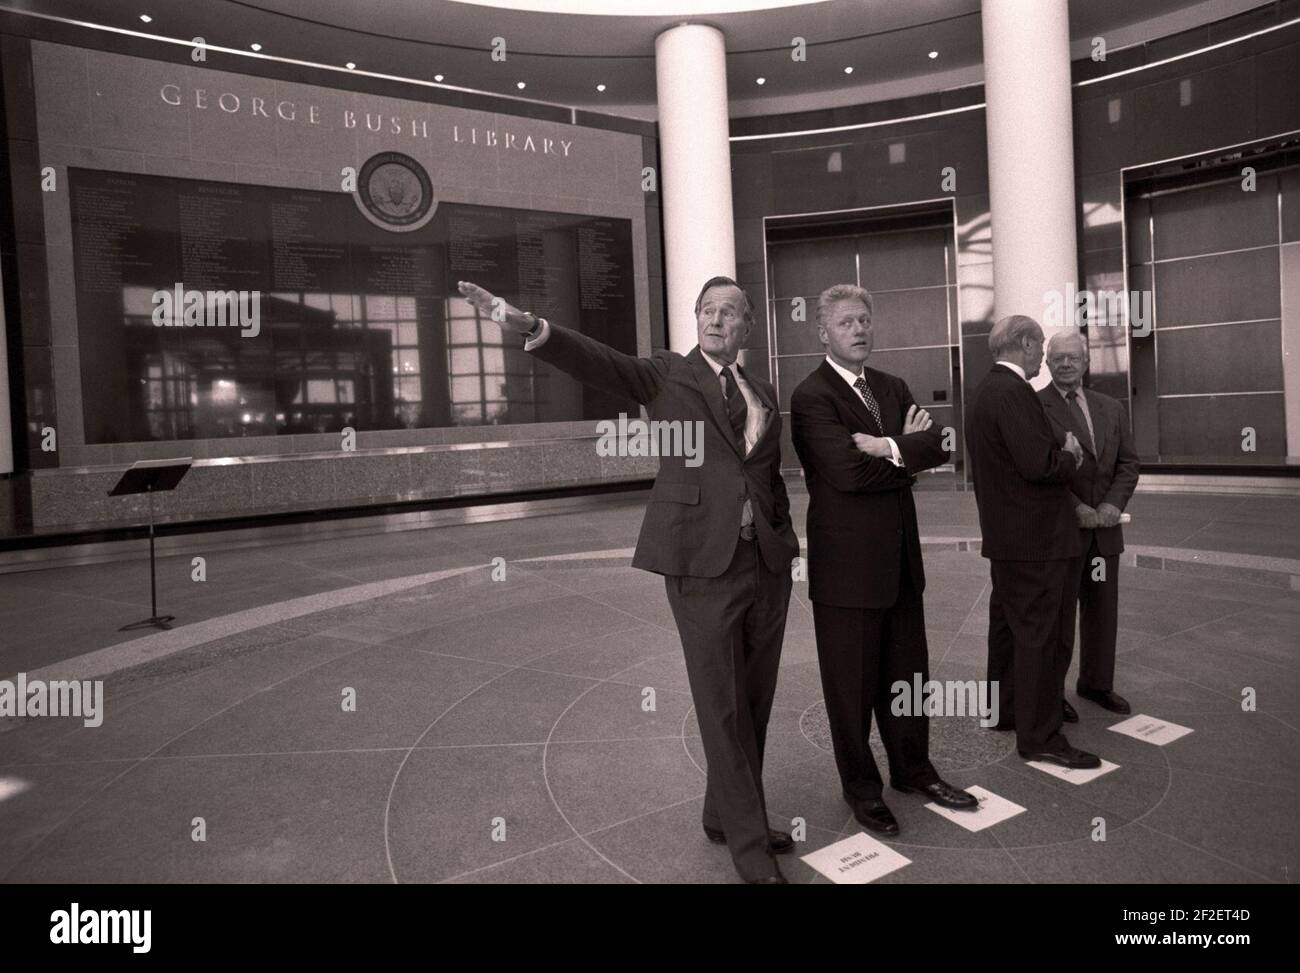 President Bill Clinton with former presidents George H. W. Bush, Gerald Ford, and Jimmy Carter. Stock Photo